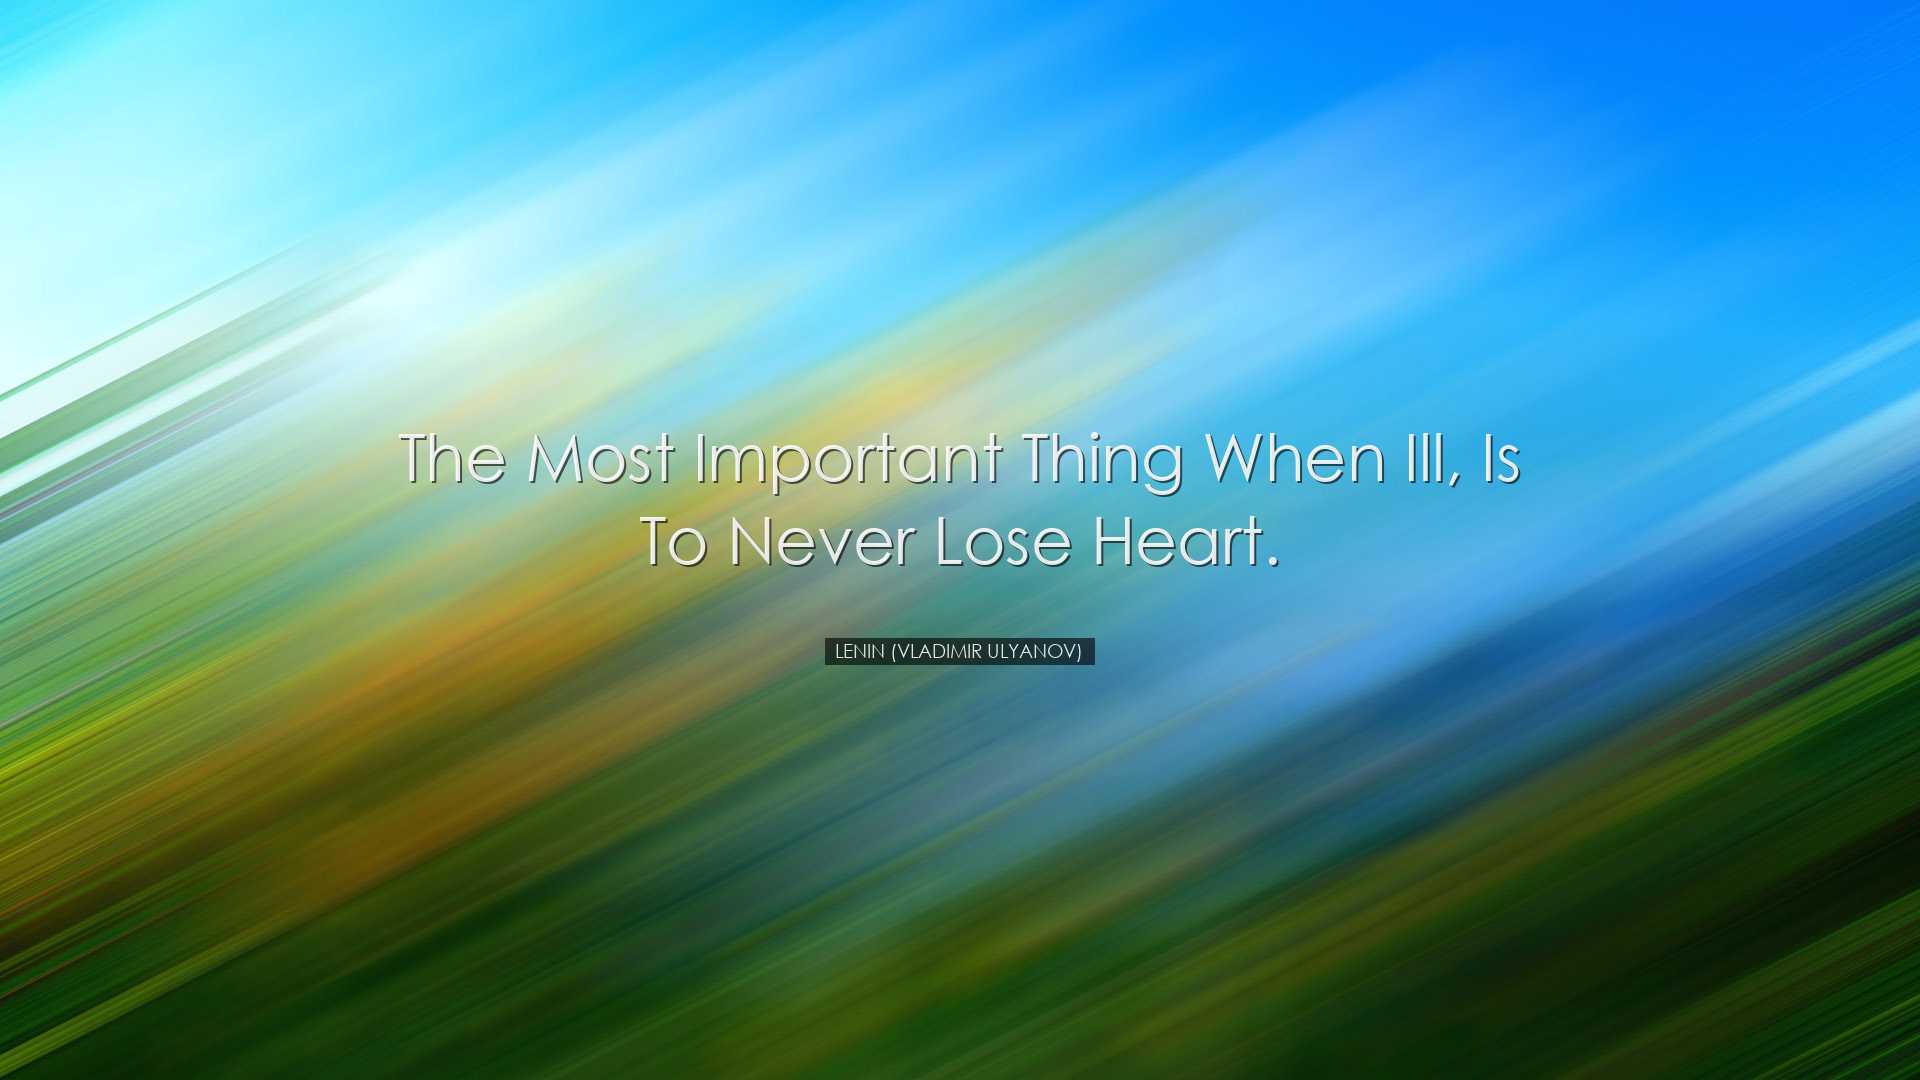 The most important thing when ill, is to never lose heart. - Lenin